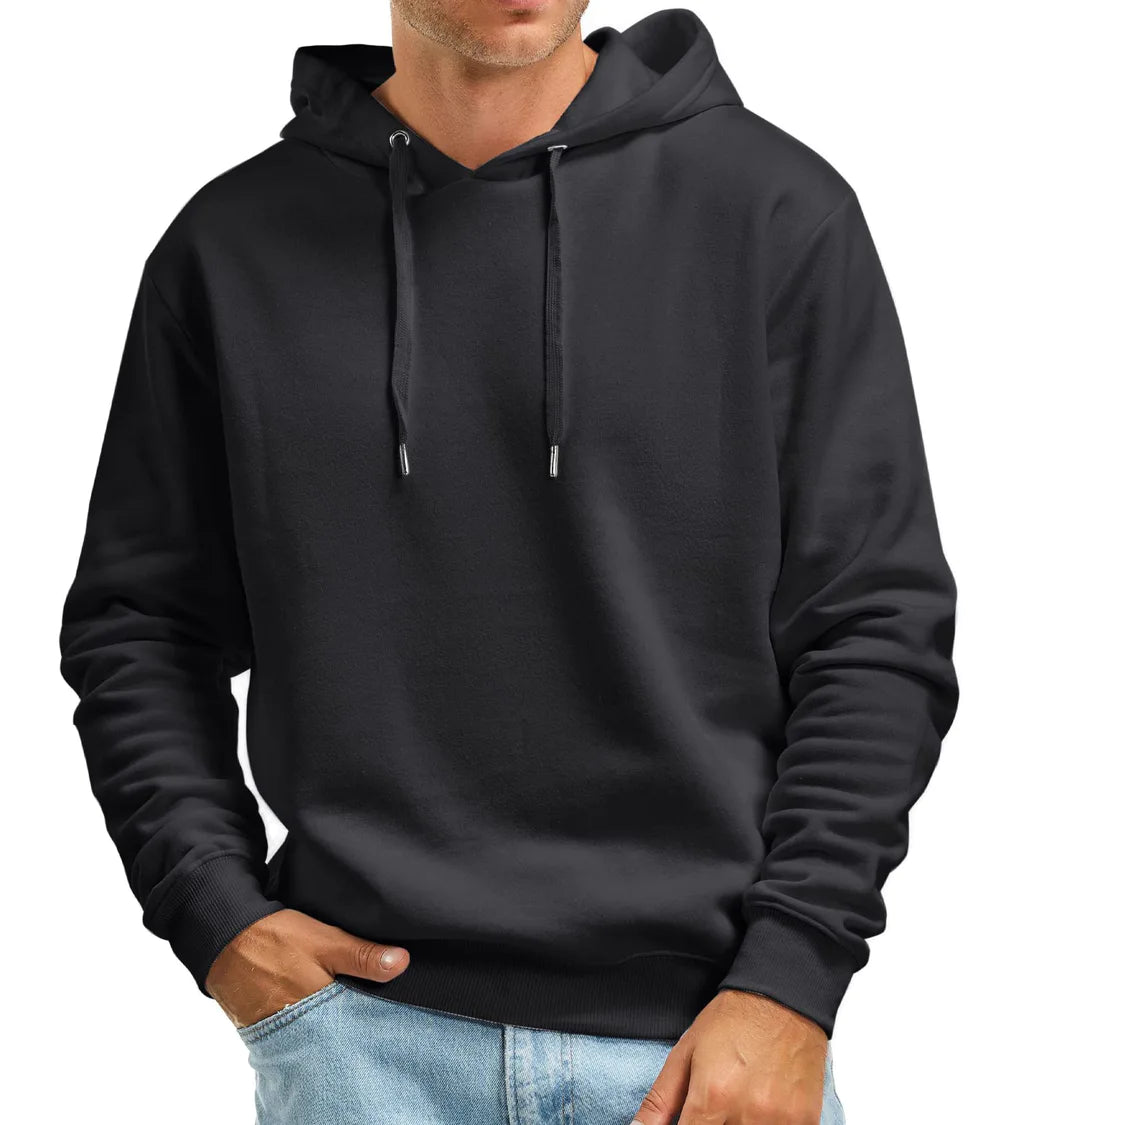 Men's Solid Color Hooded Sports Casual Pullover Sweatshirt